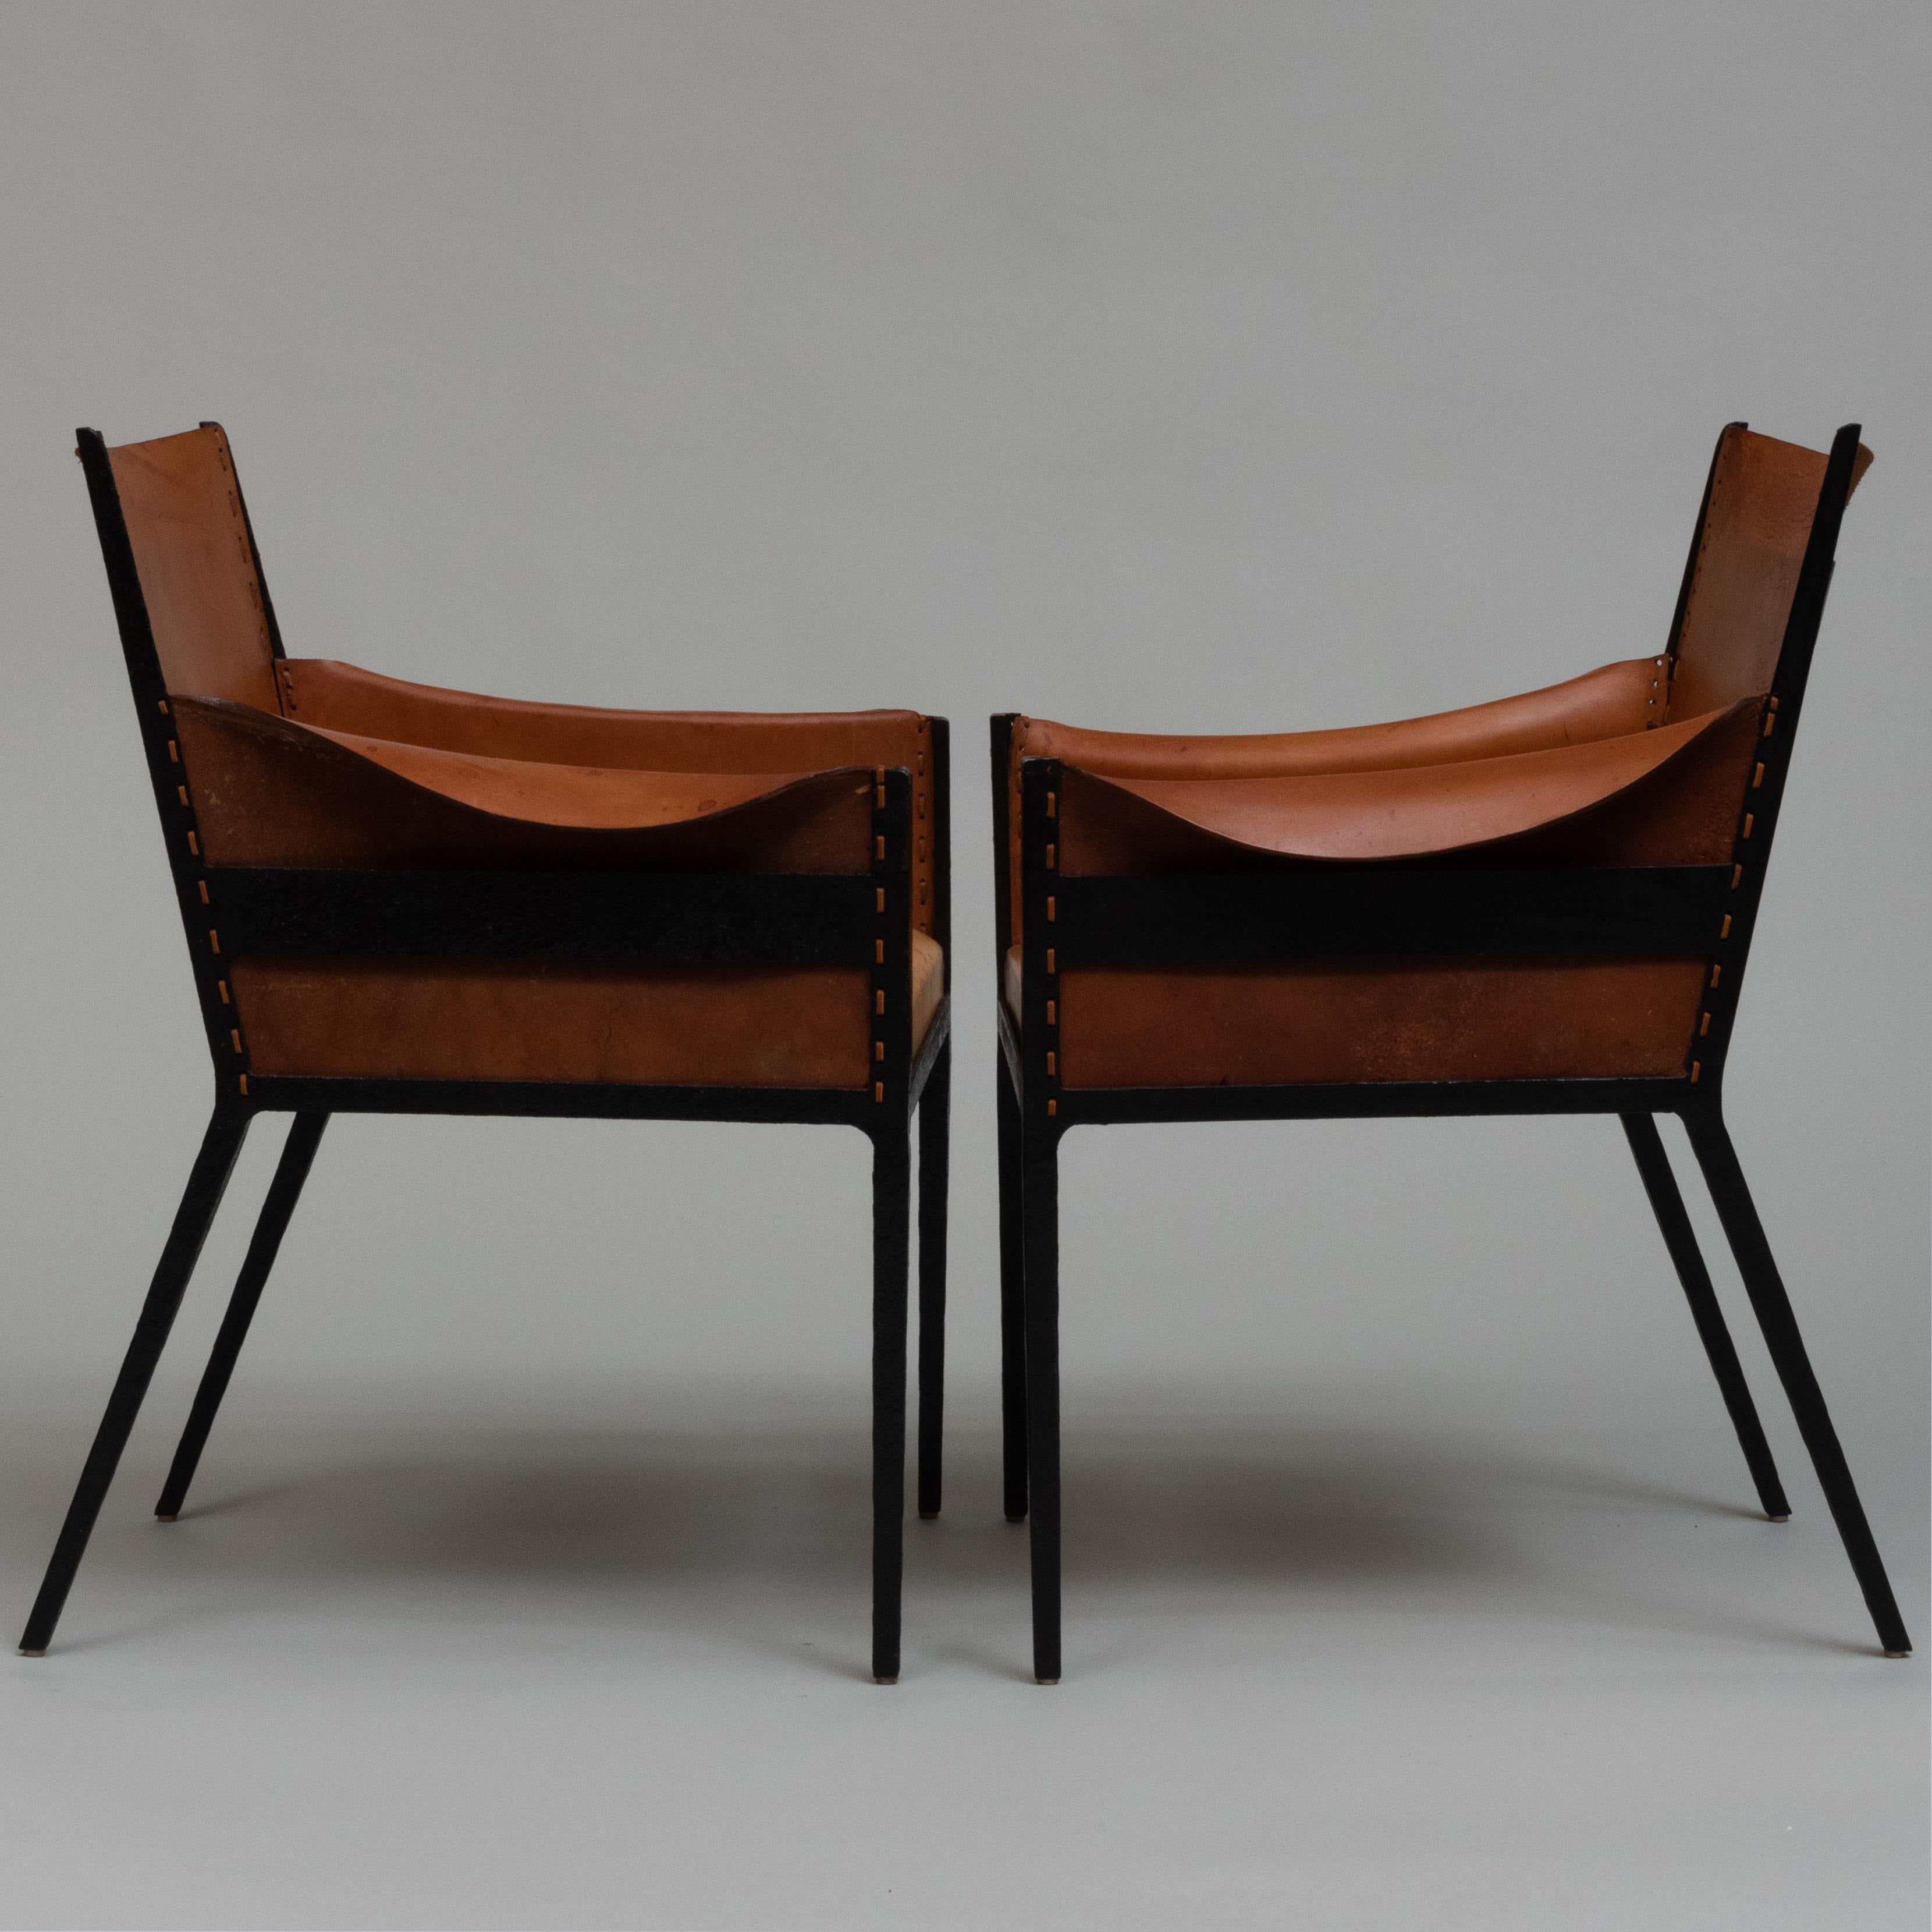 American Pair of Steel and Leather Armchairs After Jean Michel Frank